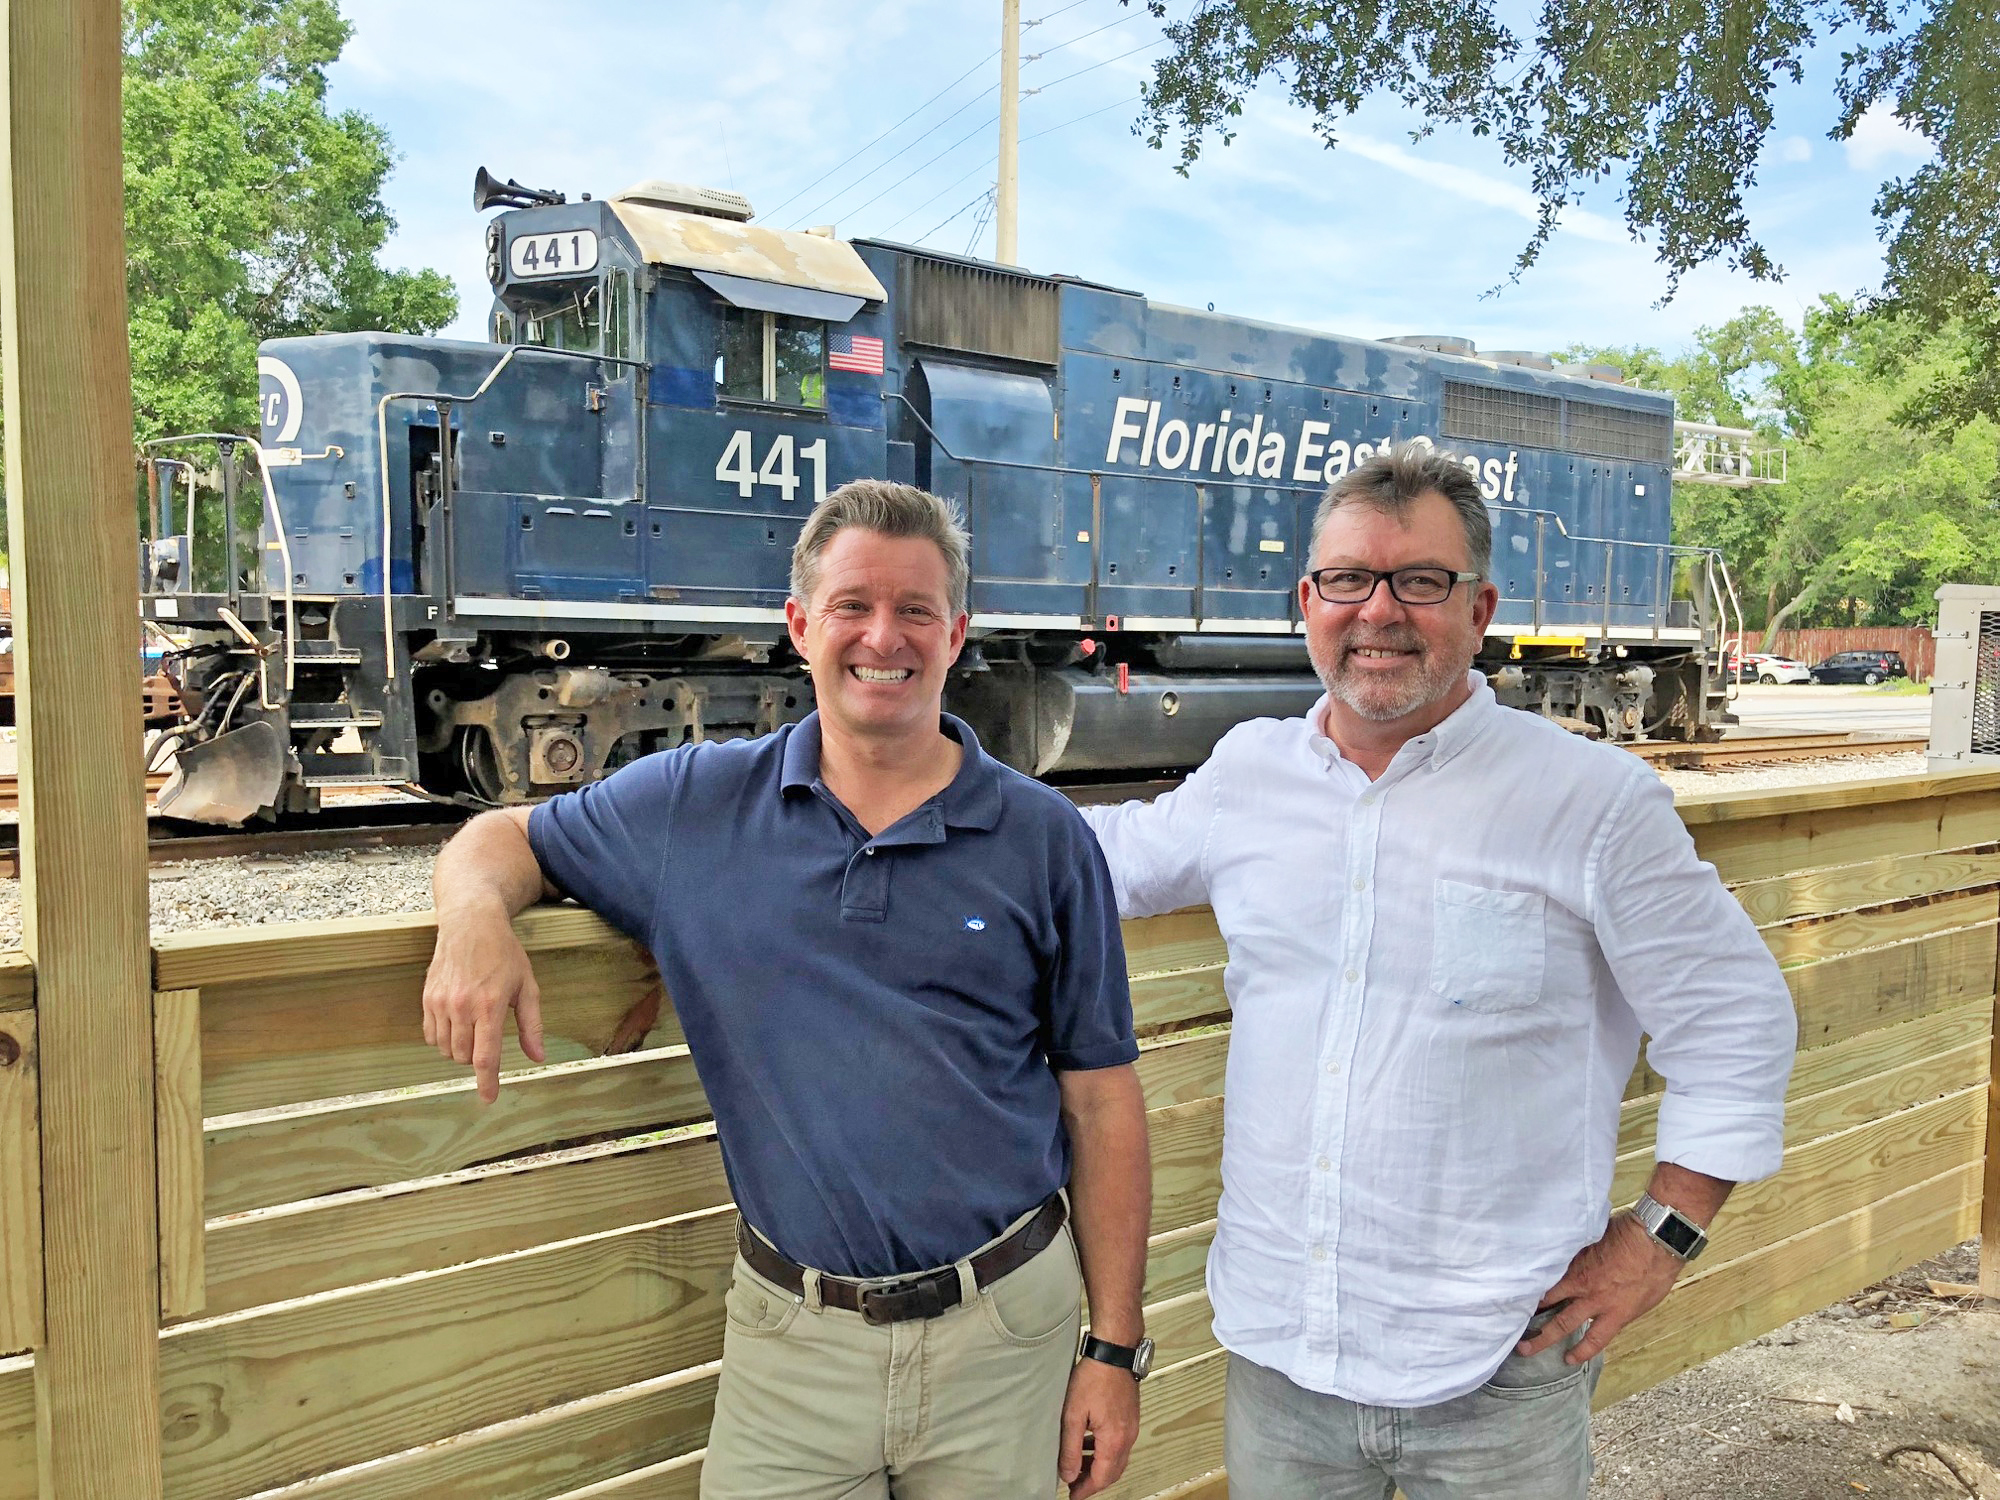 Mark Janasik and Edward Skinner Jones at the Southern Grounds & Co. San Marco coffee shop at 1671 Atlantic Blvd., where “blueberry, artisan bakery” will set up production. The building is along the railroad tracks.